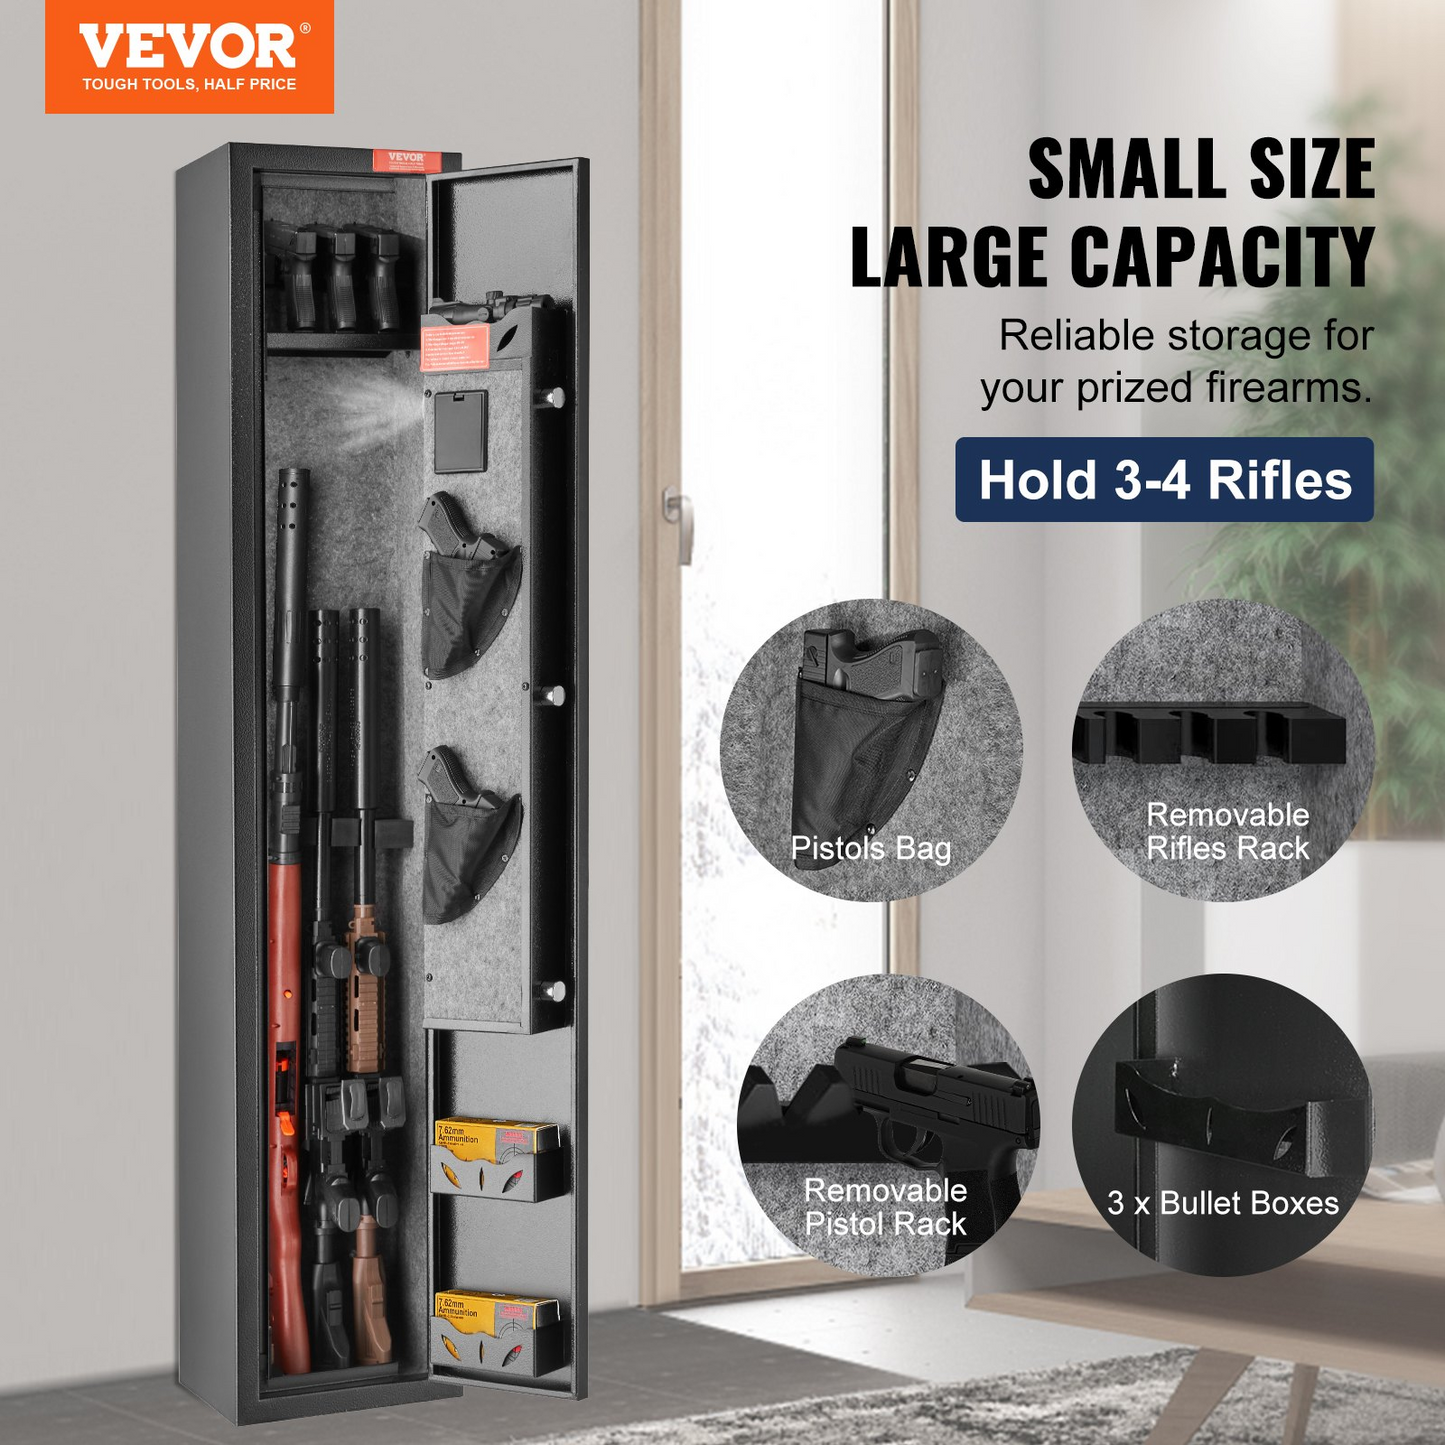 VEVOR 3 Rifles Gun Safe, Rifle Safe with Lock & Digital Keypad, Quick Access Gun Storage Cabinet with Removable Shelf, Pistol Rack, Rifle Cabinet for Home Rifle and Pistols, Goodies N Stuff